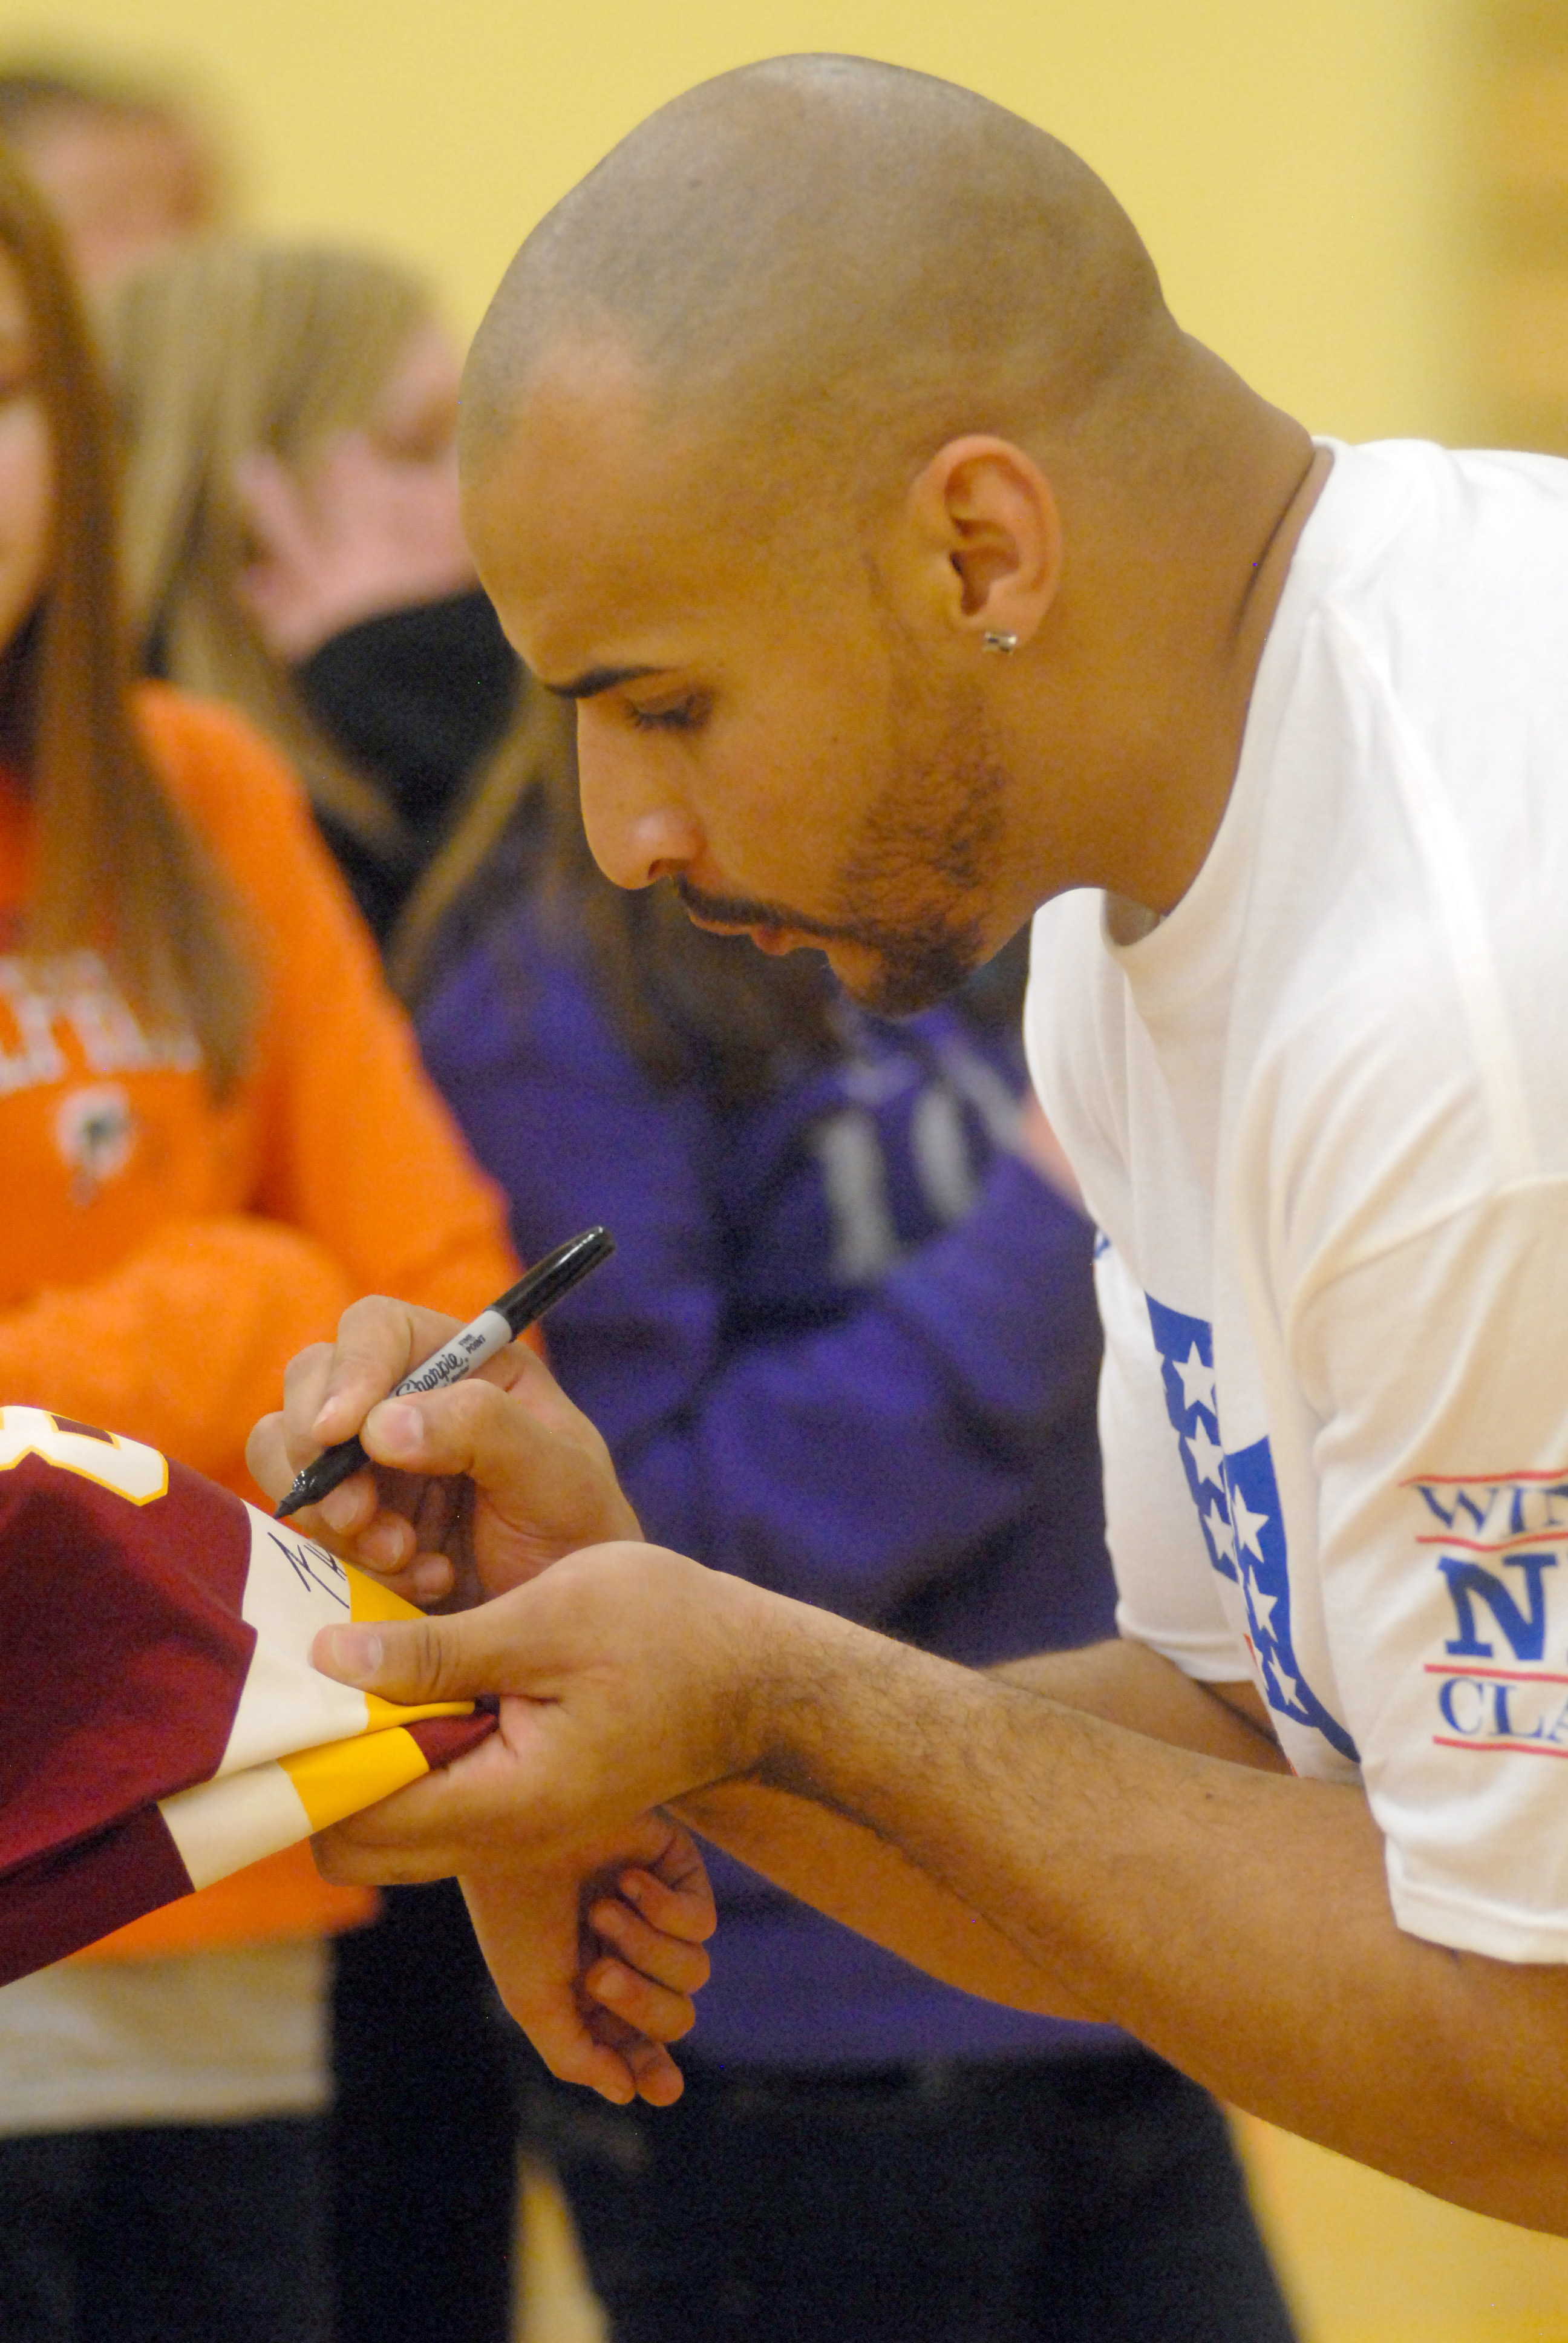 Former Flathead High School and University of Montana football player Lex Hilliard signs autographs during the Whitefish Winter Classic's NFL 60 Challenge in Whitefish. Hilliard is currently a running back for the Miami Dolphins. - Lido Vizzutti/Flathead Beacon